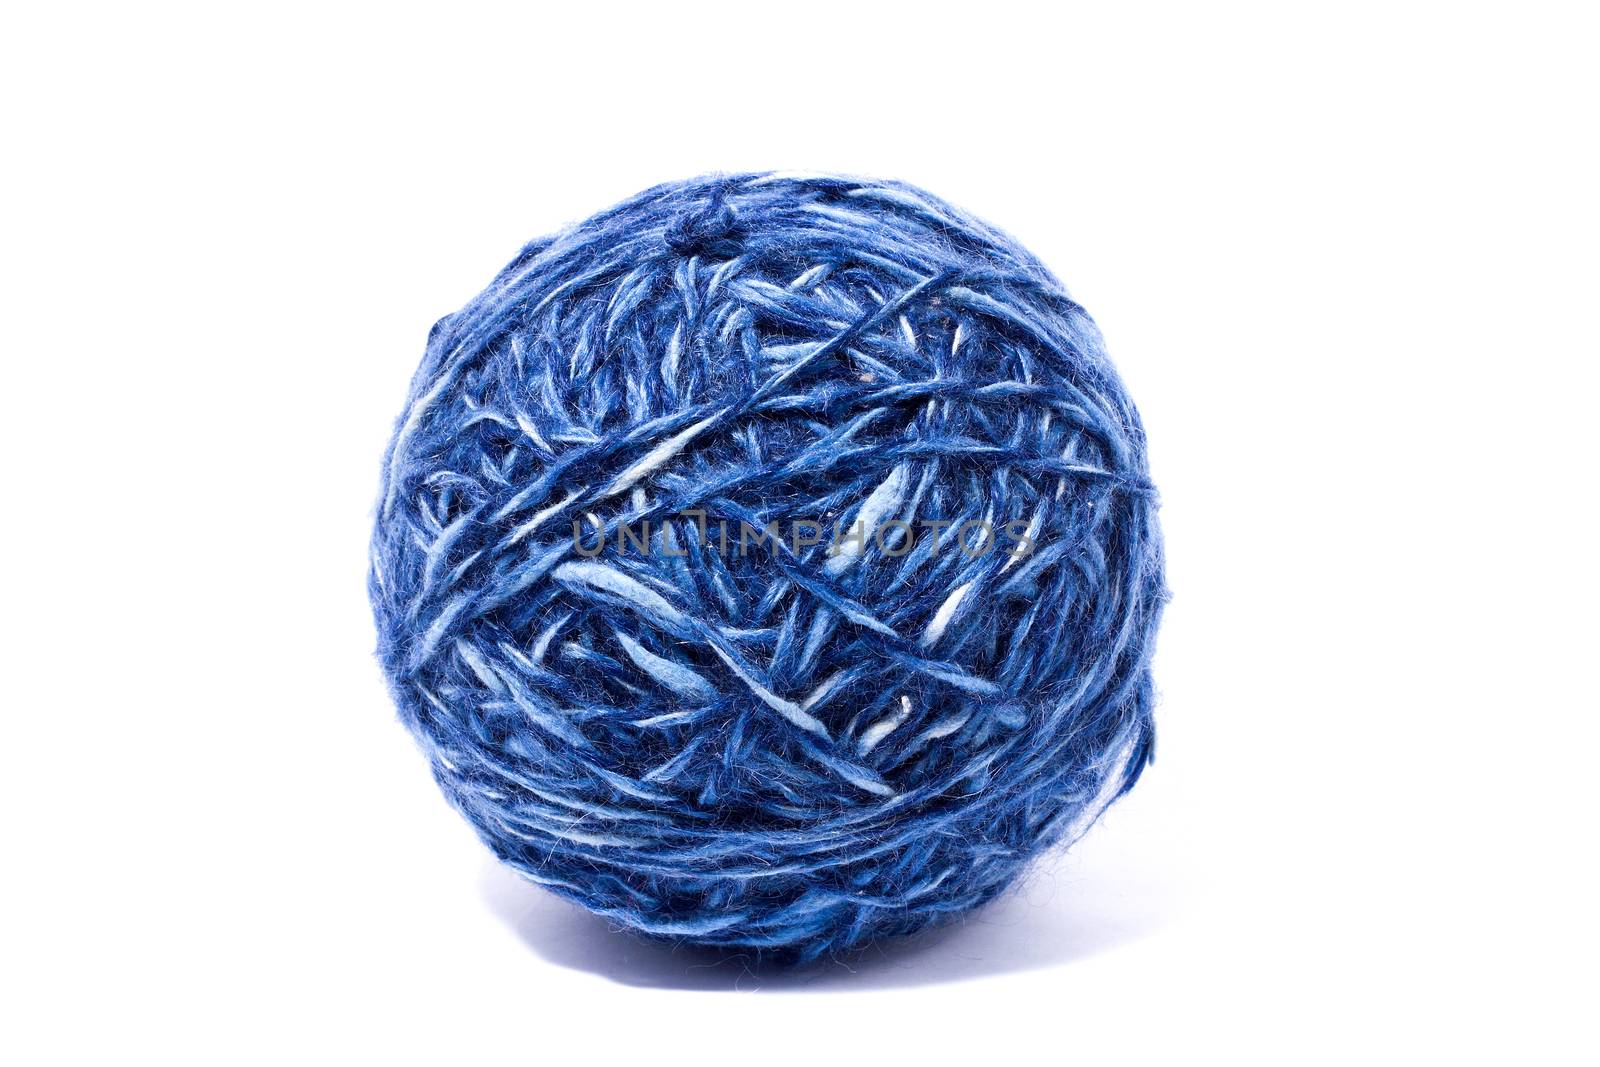 blue ball of yarn for knitting, isolate, homemade crafts